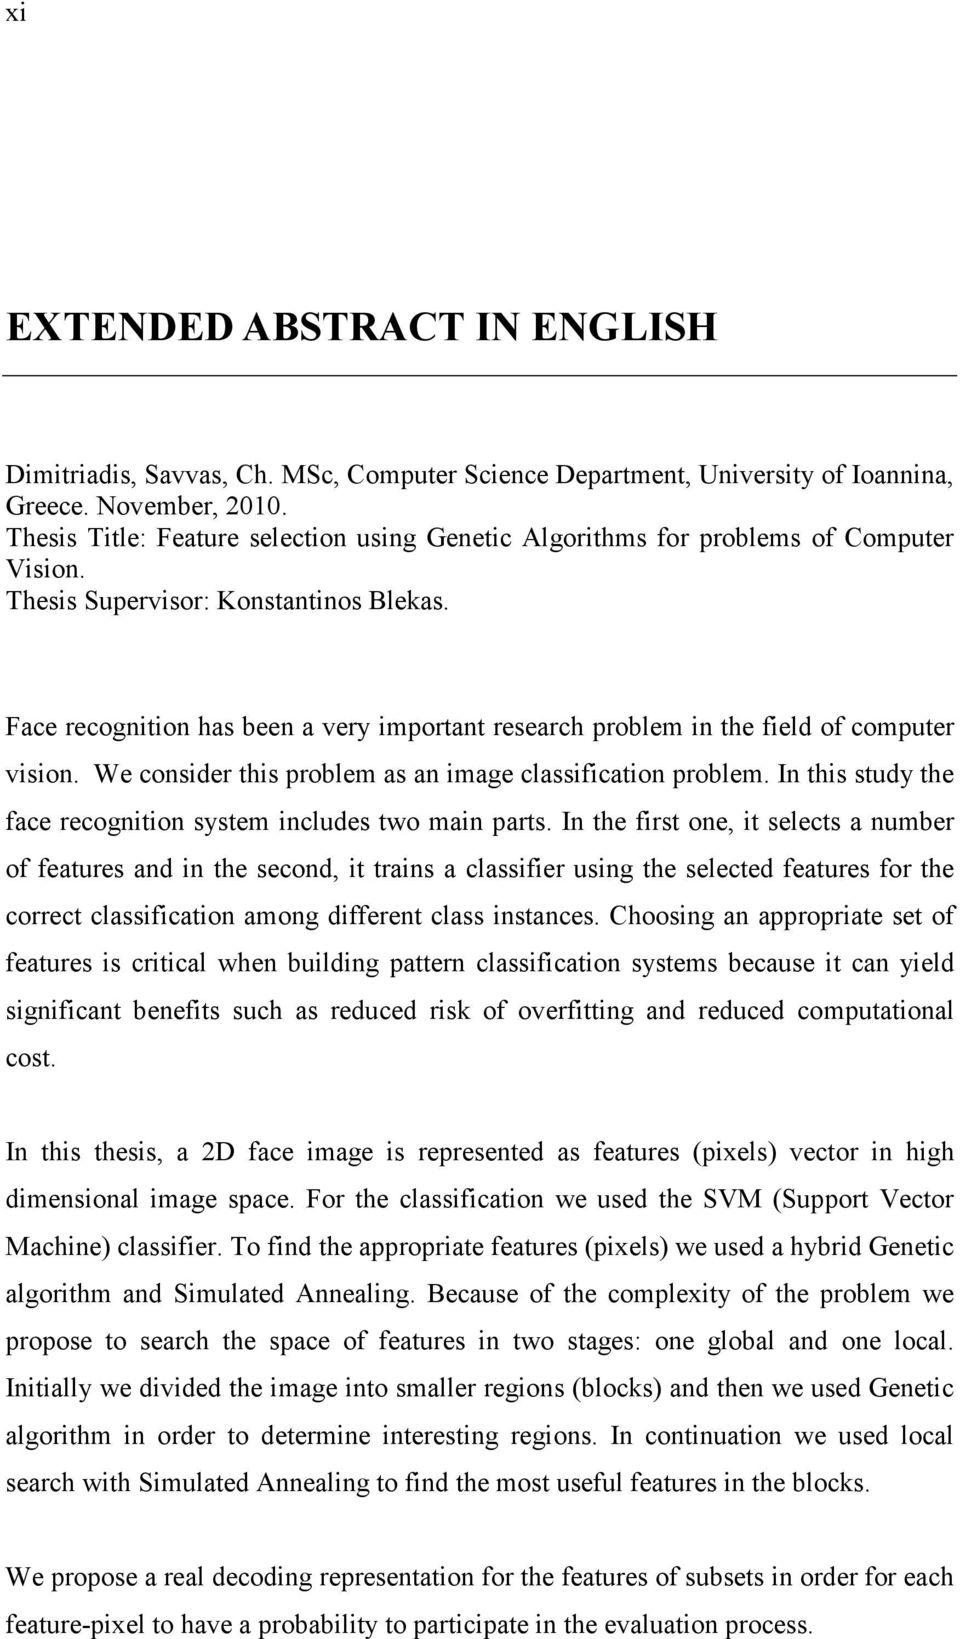 Face recognition has been a very important research problem in the field of computer vision. We consider this problem as an image classification problem.